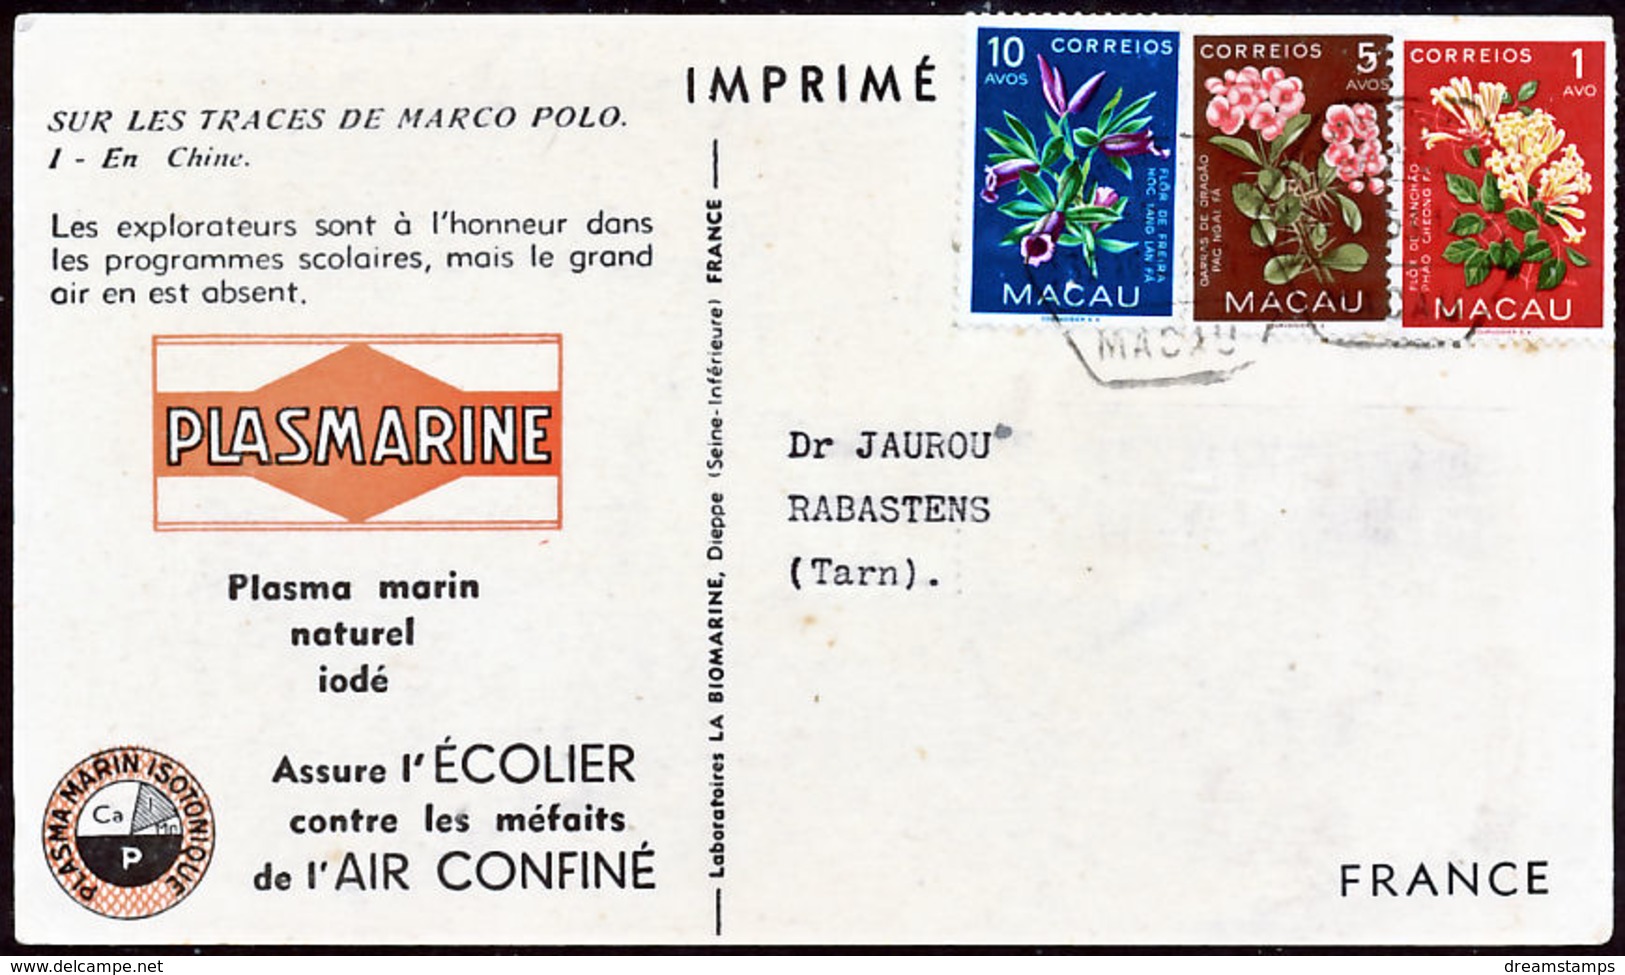 !										■■■■■ds■■ Macao 1953 Advertising Cover Rate 16 Avos To France Marco Polo Anf The Grand Khan (CO372) - Brieven En Documenten